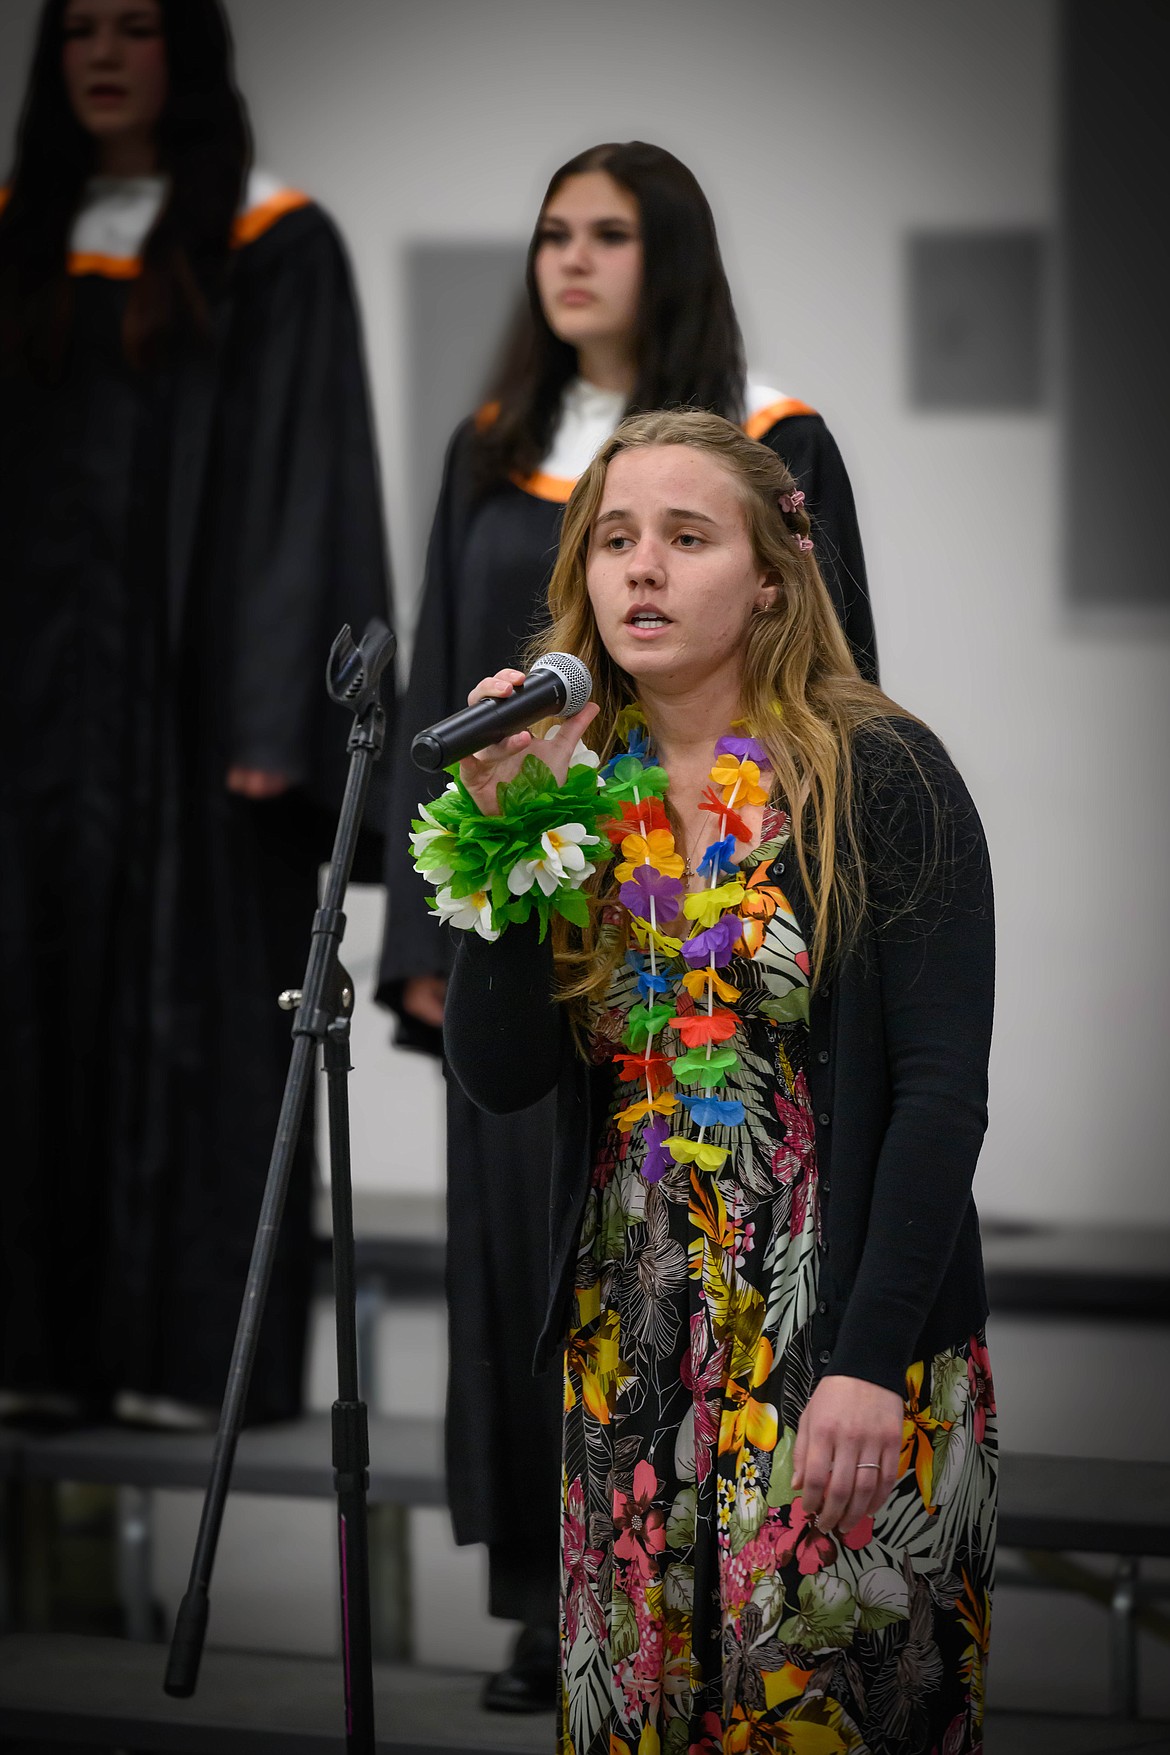 Abigail Wessely performs a solo during the choir concert. (Tracy Scott/Valley Press)